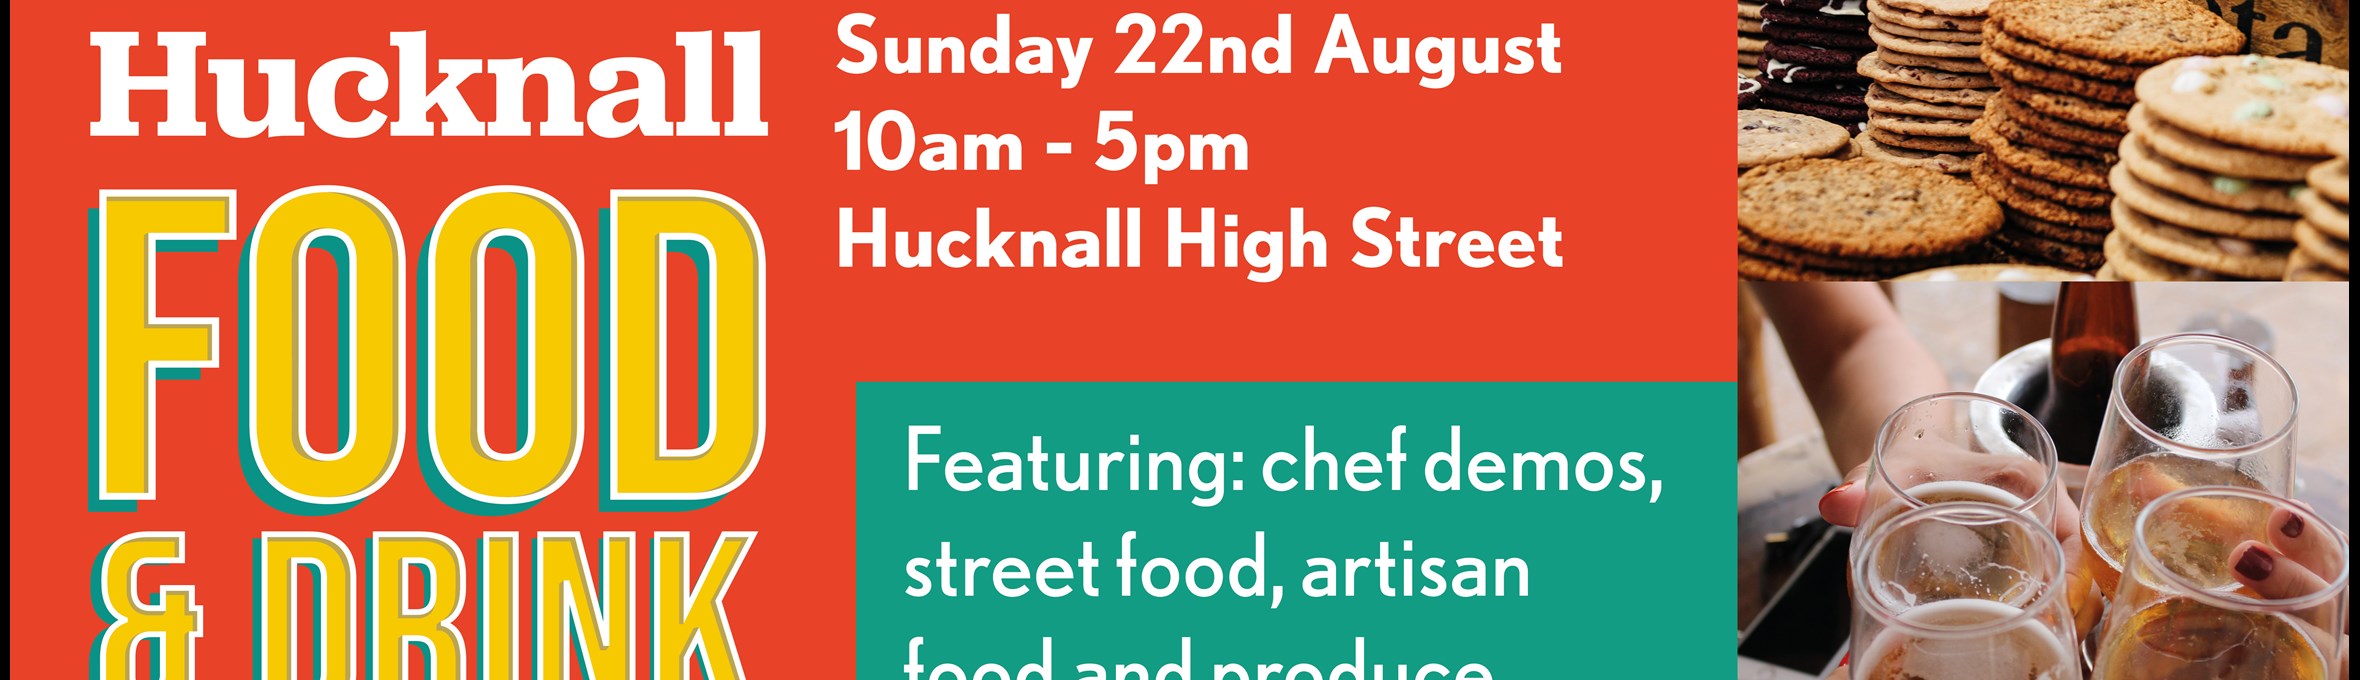 Hucknall Food and Drink Festival poster Sunday 22nd August 